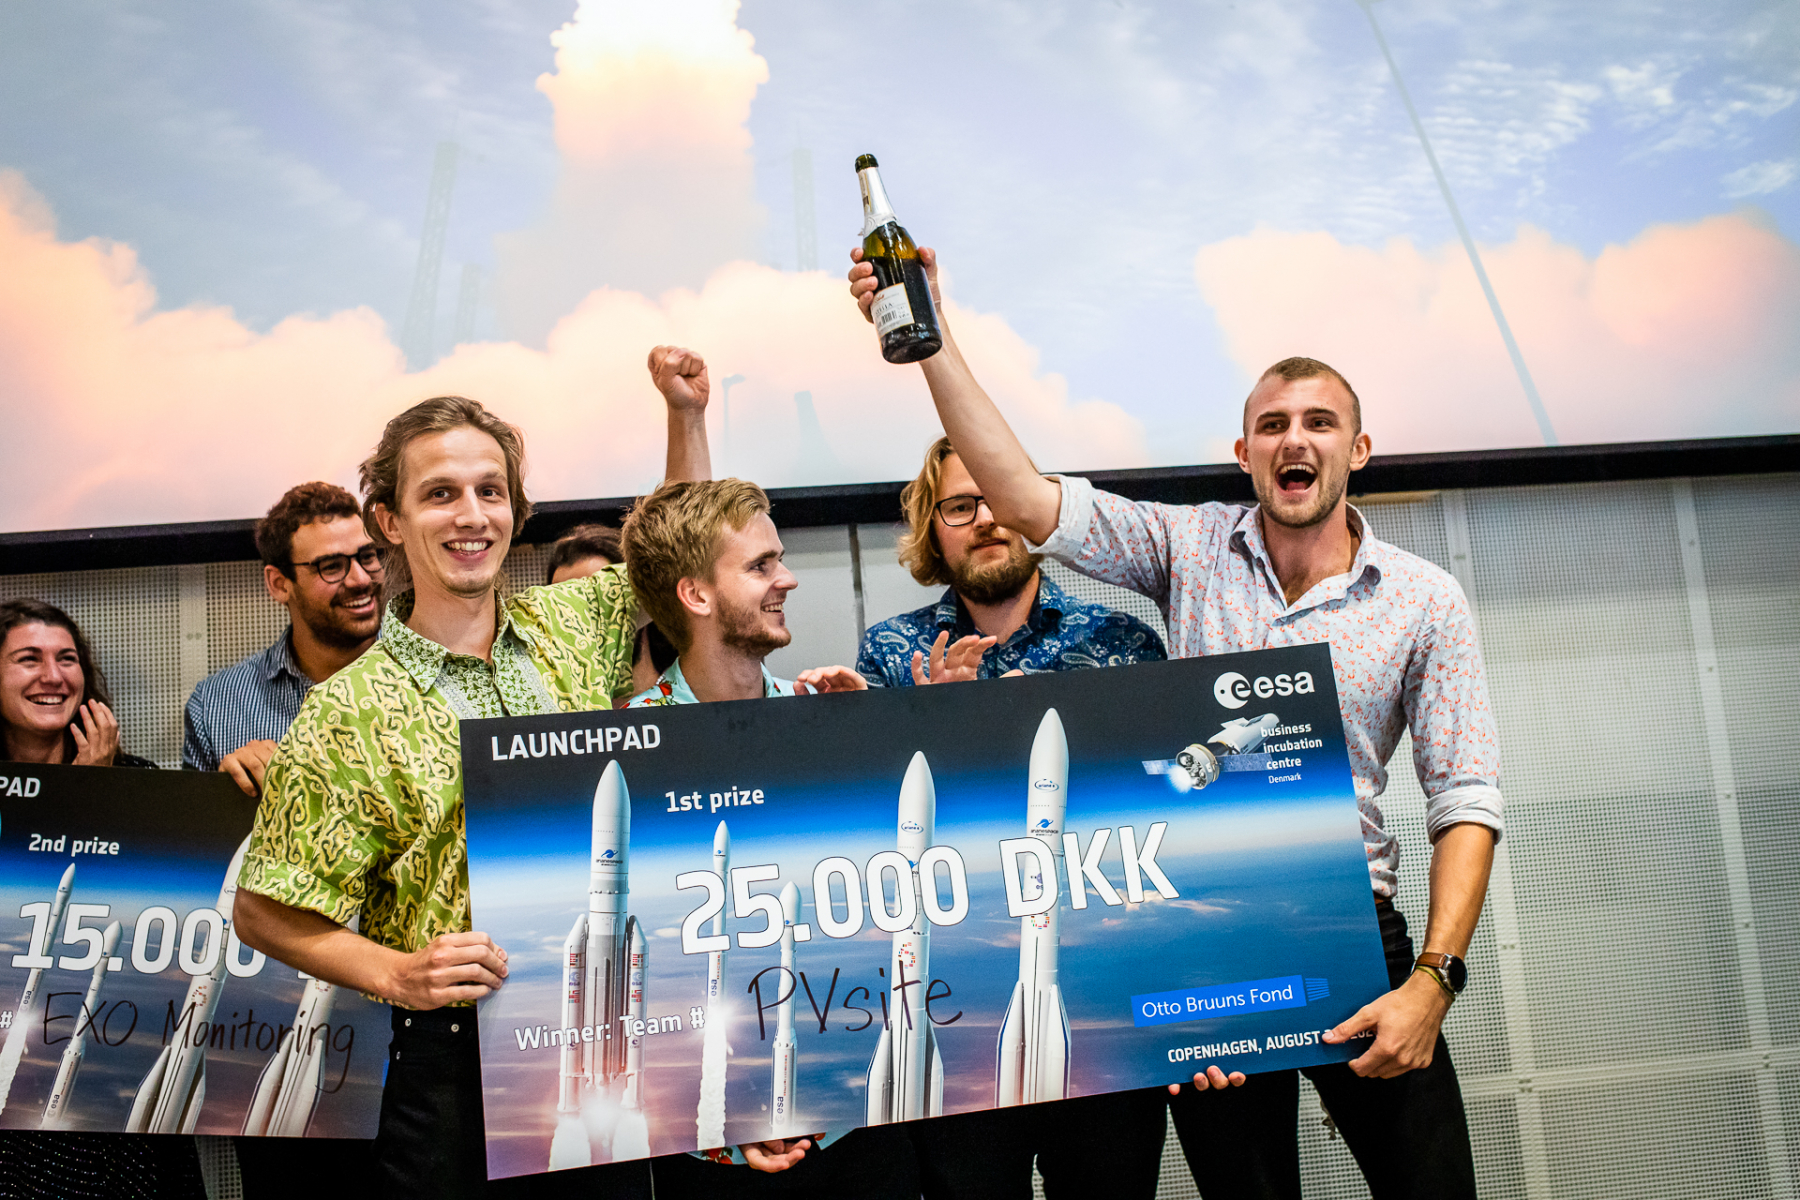 Launchpad first place start-up PVSite. Image credit: Kaare Smith/ESA BIC Denmark